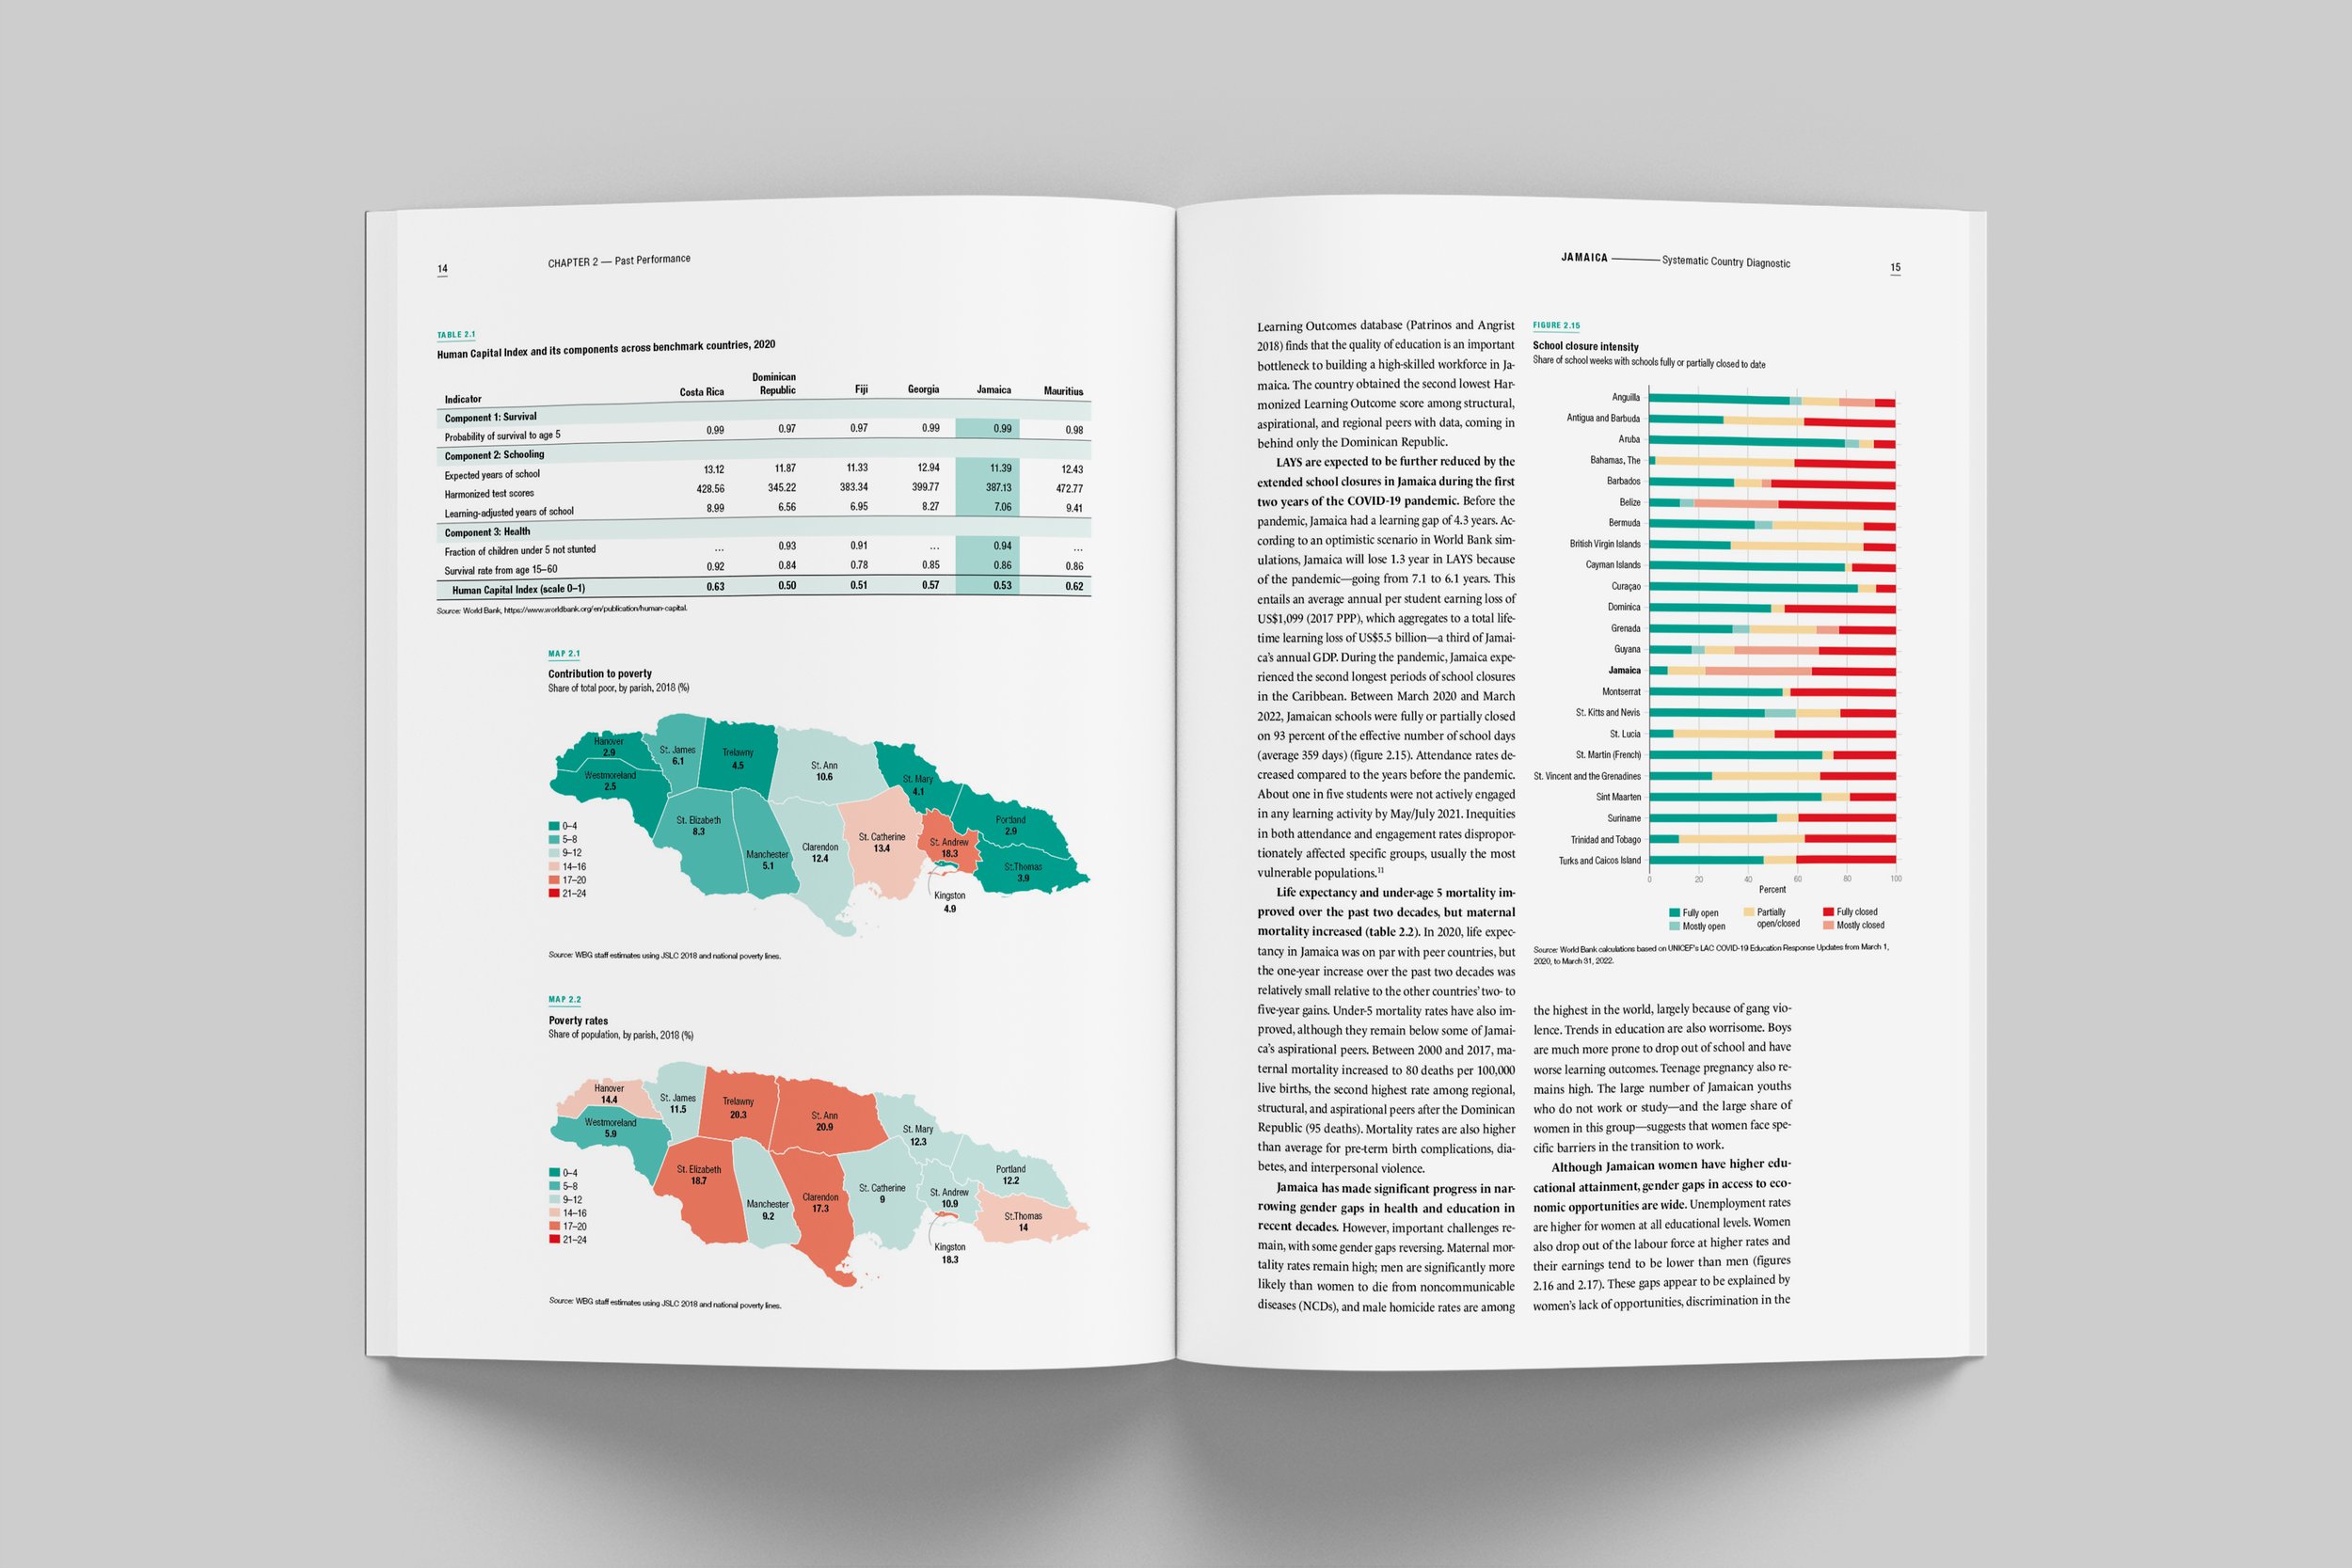 Information design and report layout produced by Designed for Humans for the World Bank Jamaica - Systematic Country Diagnostic